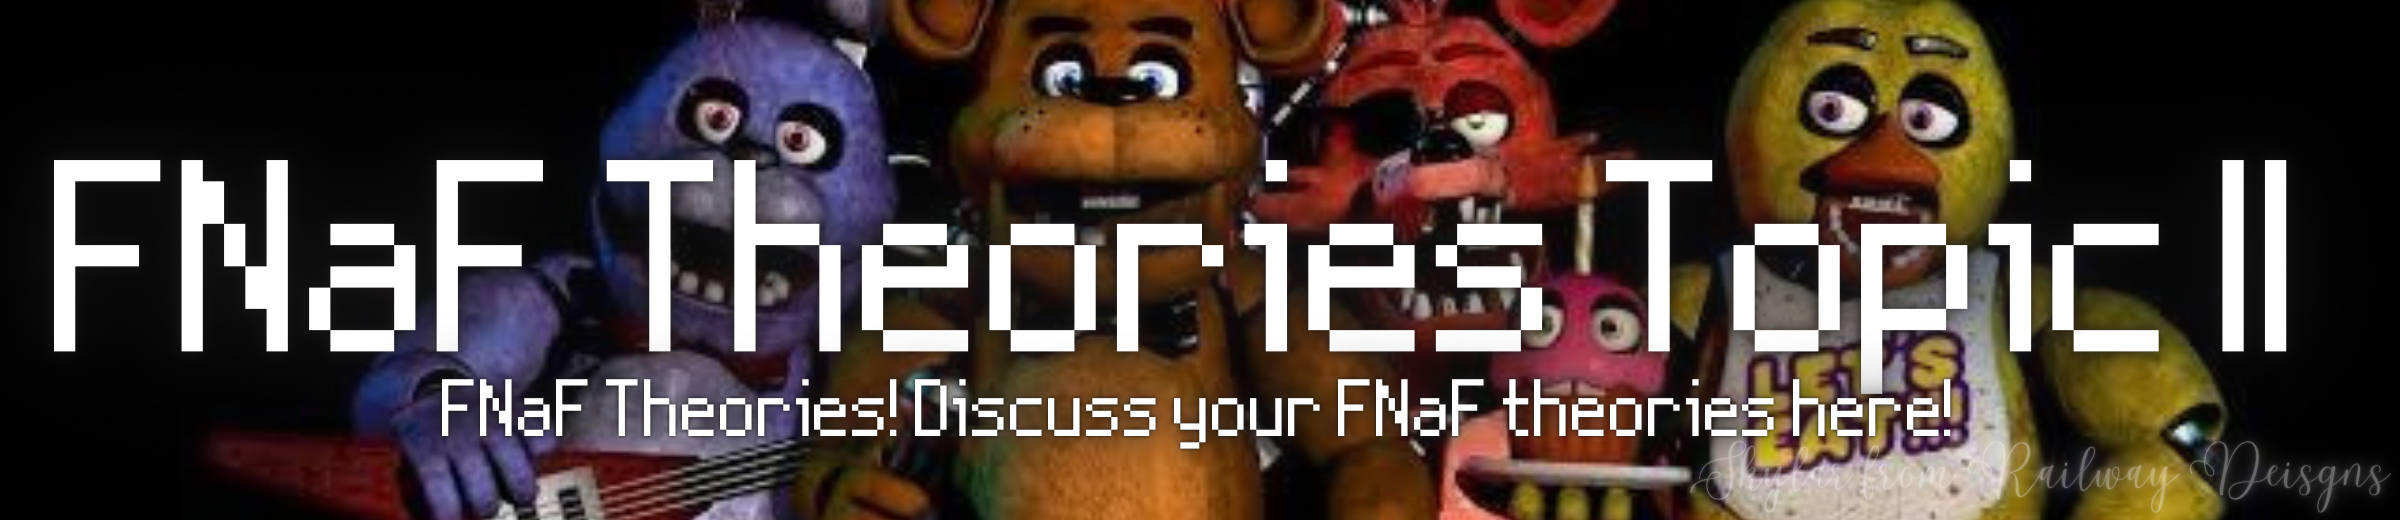 FNaF theories topic ll [potential spoilers] [New Banner!] - Discuss Scratch